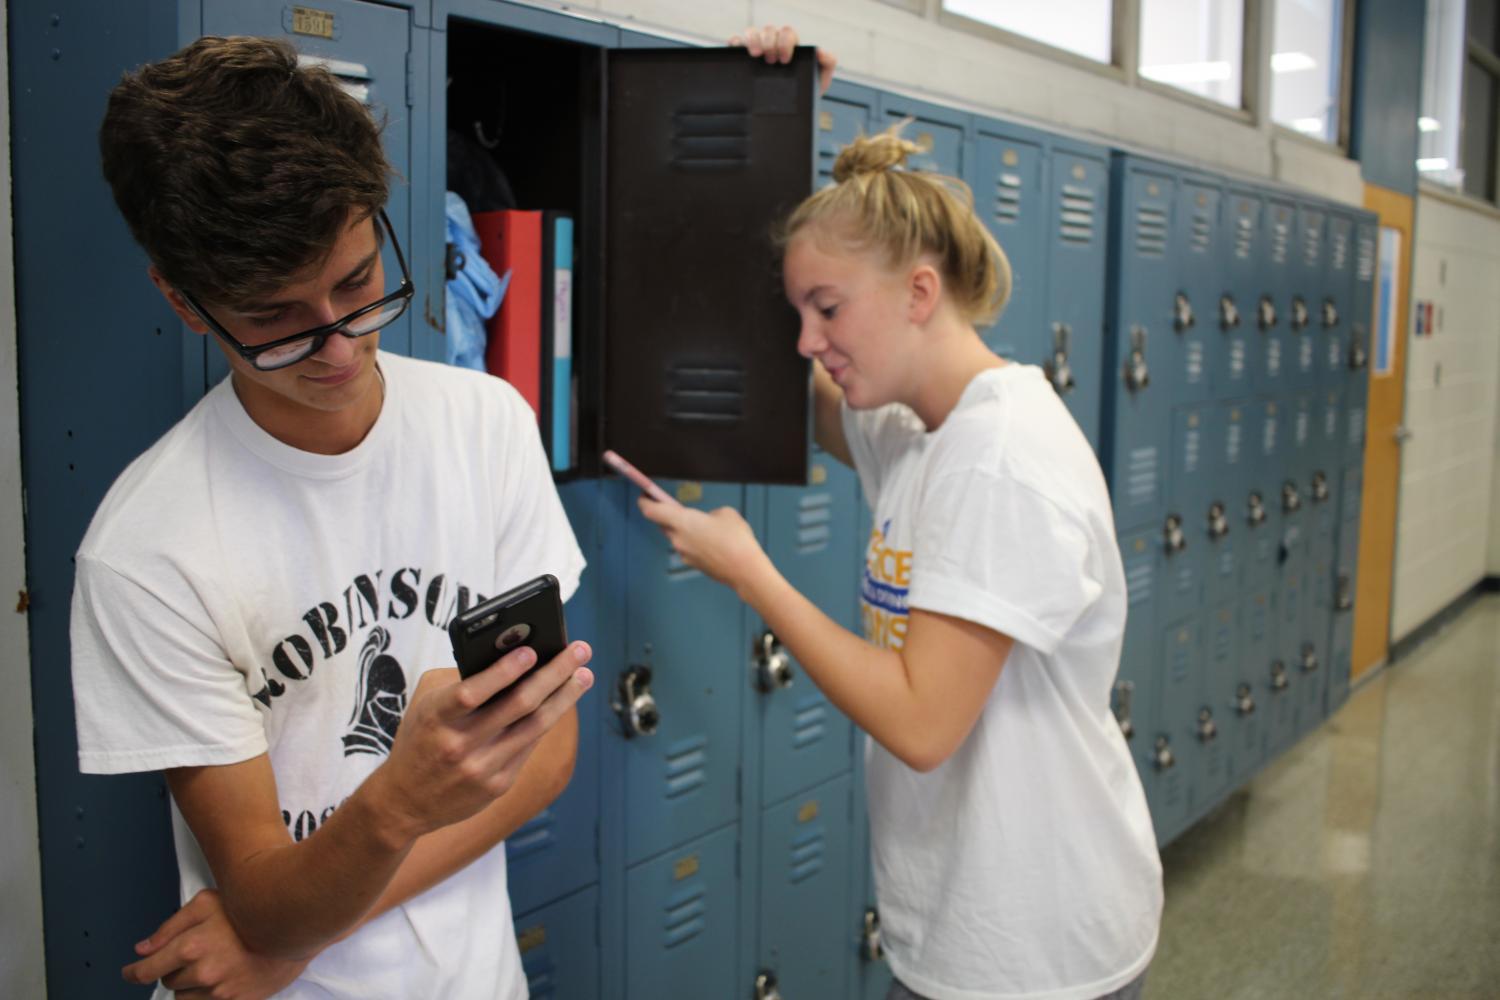 Abigail+Meyer+%2818%29+and+Andrew+McMillan+%2818%29+wait+in+the+halls+of+Robinson+on+their+cellphones.